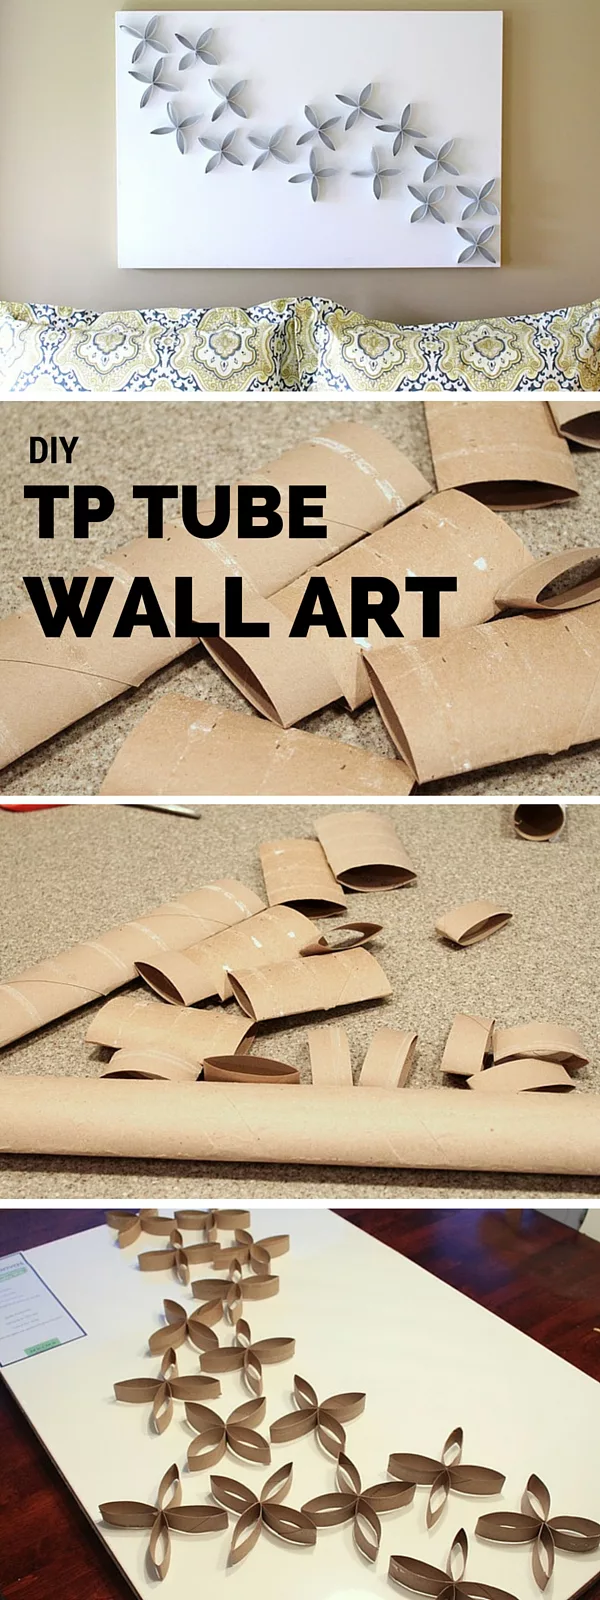 Check out the tutorial:  TP Tube Wall Art  